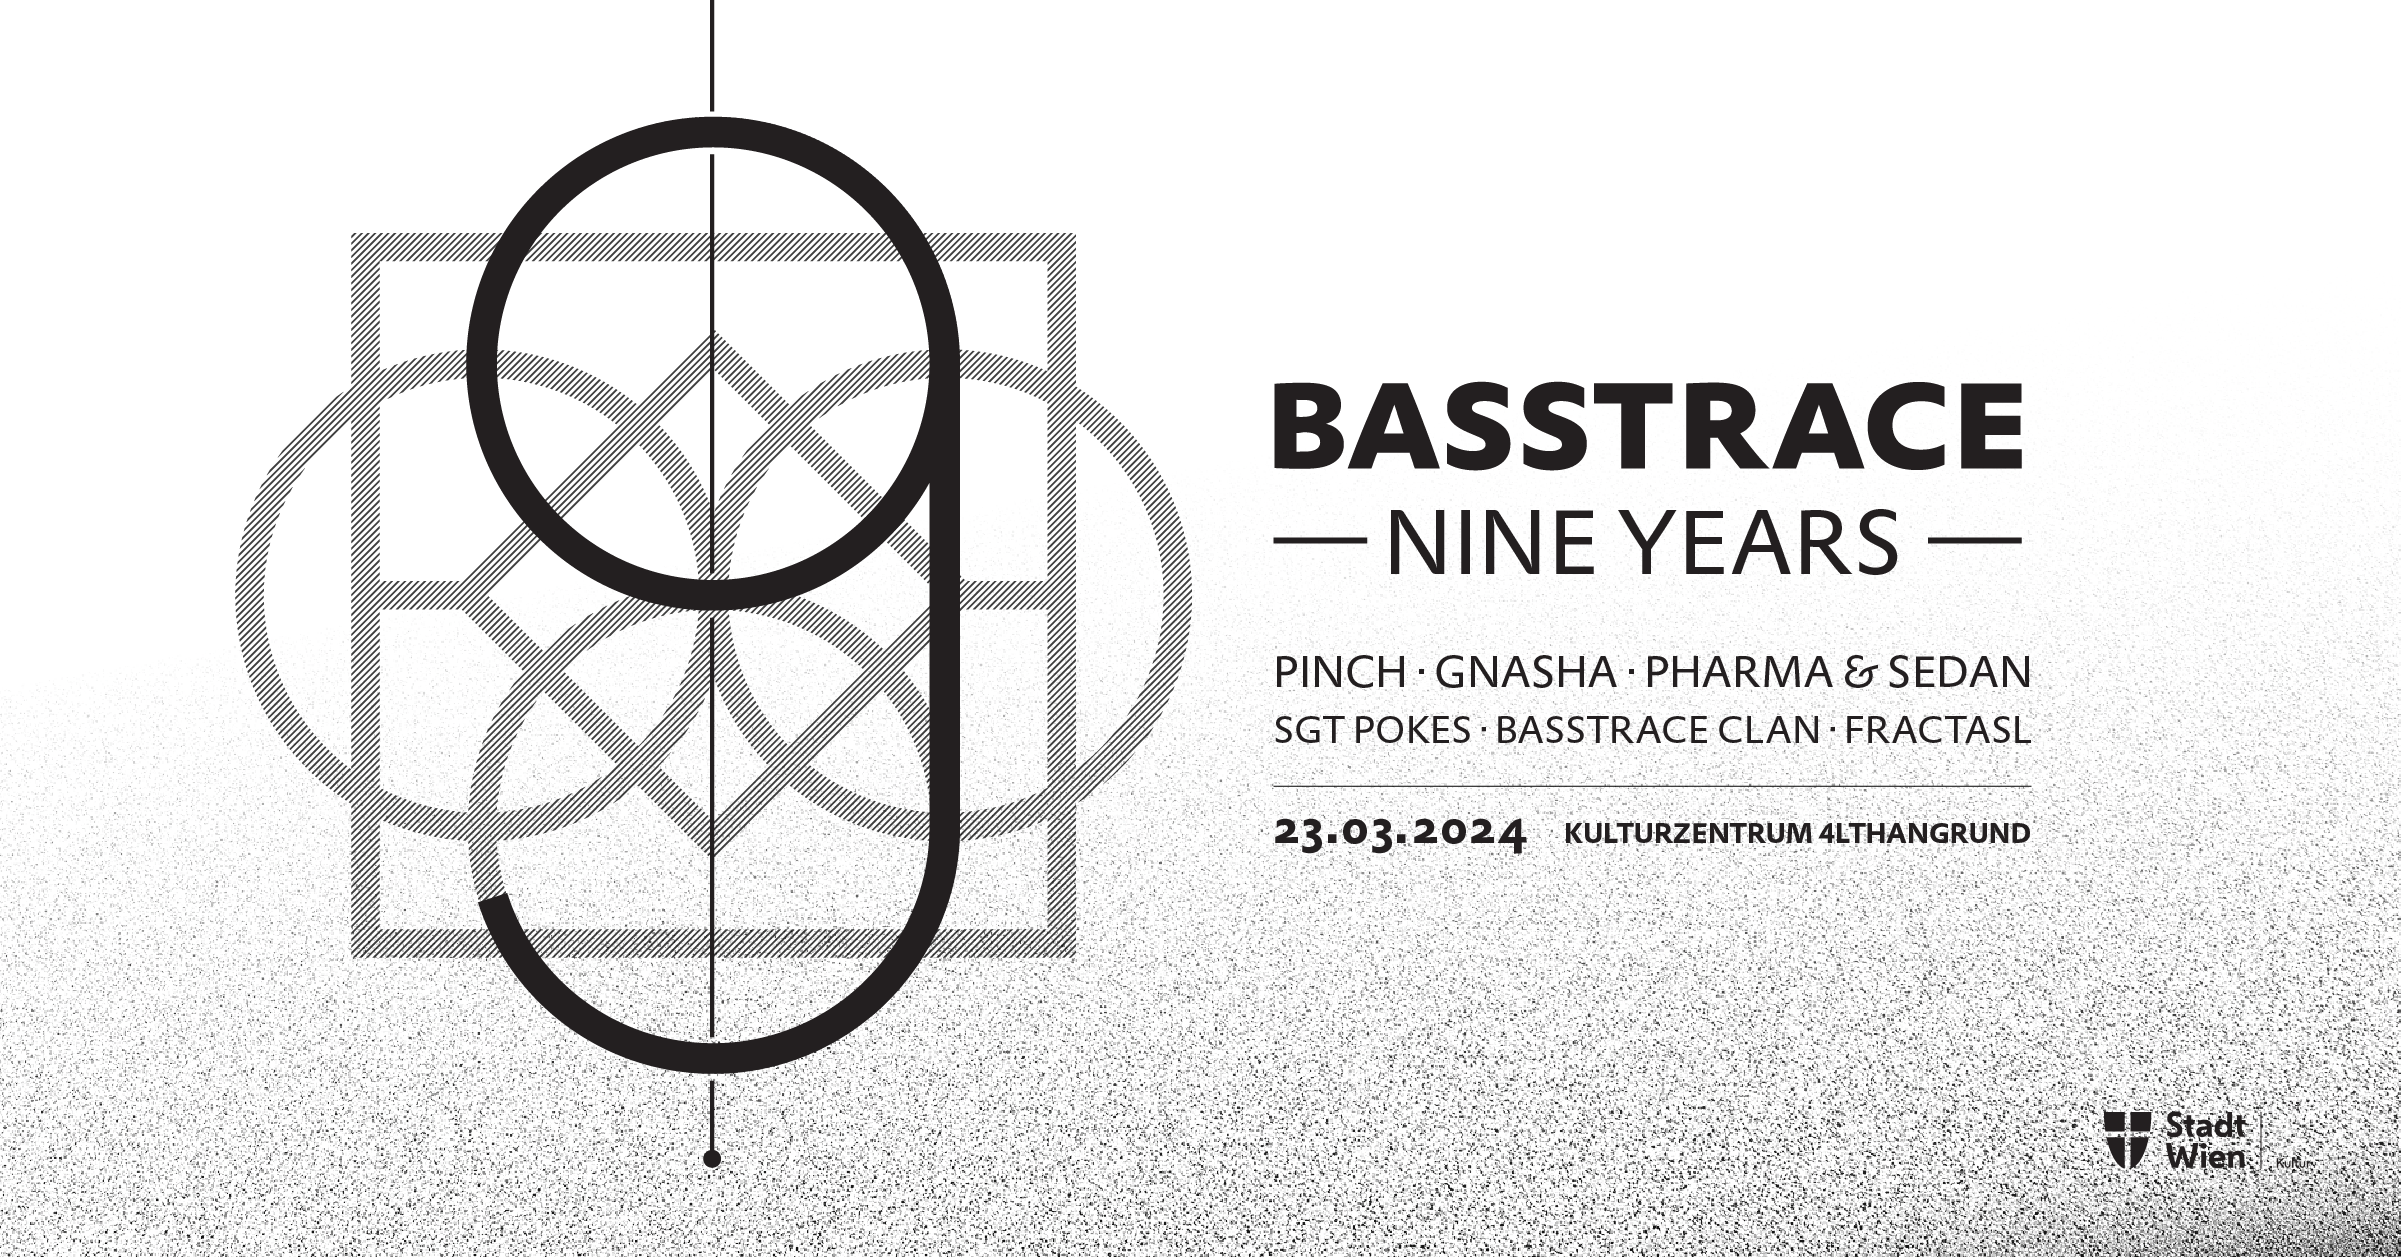 Basstrace 9 YEARS with PINCH, GNASHA, PHARMA & SEDAN - hosted by SGT Pokes - フライヤー表